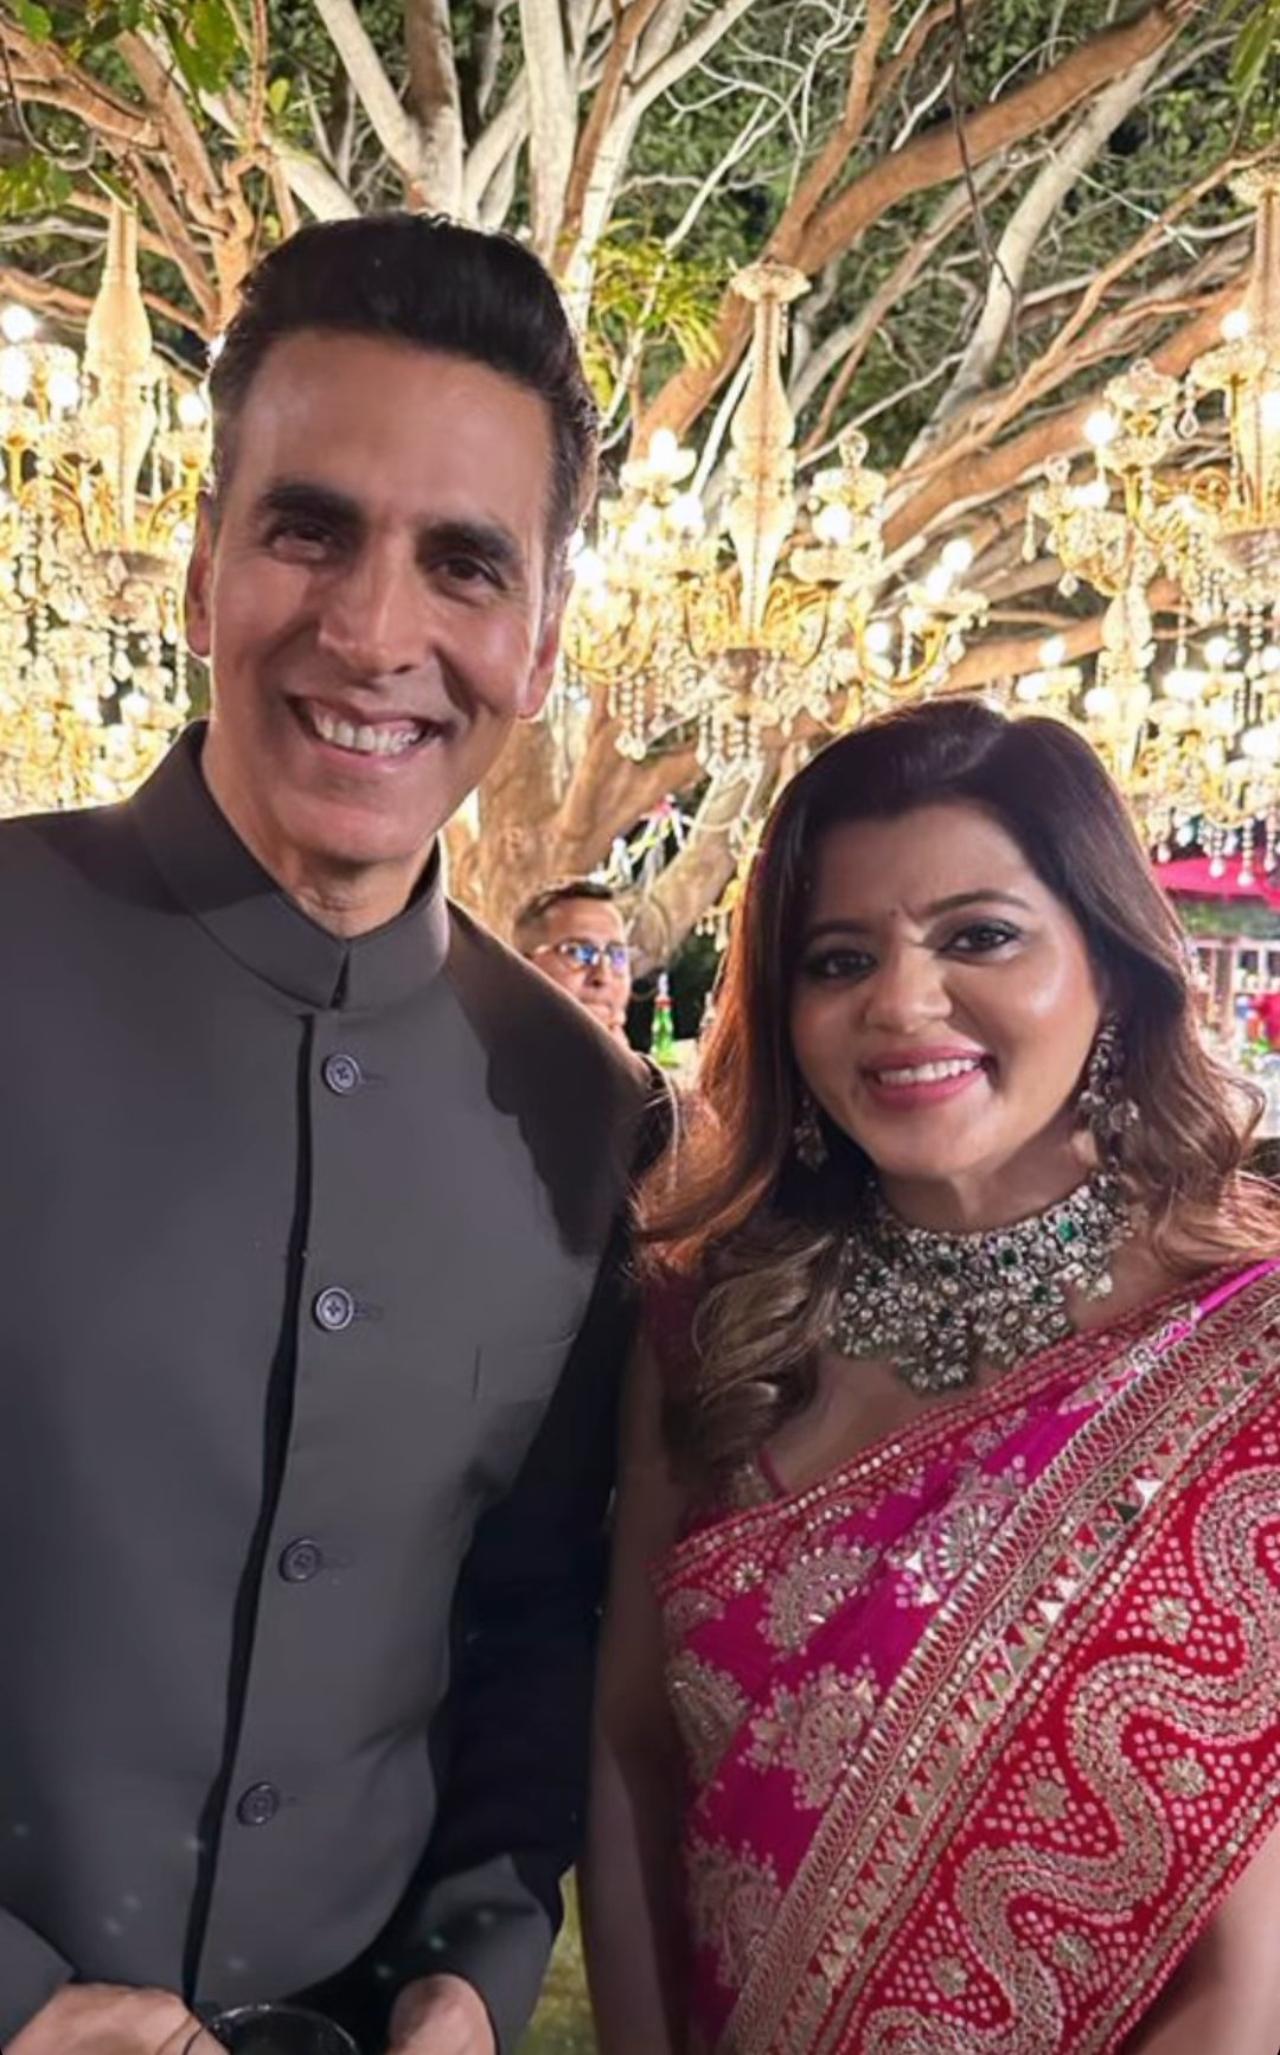 A day ago, Supriya dropped this picture of herself with Akshay Kumar. Supriya along with Prithviraj are co-producers of Akshay's upcoming film, Selfiee. Prithviraj will also be sharing screen with Akshay in the upcoming film 'Bade Miyan Chote Miyan'